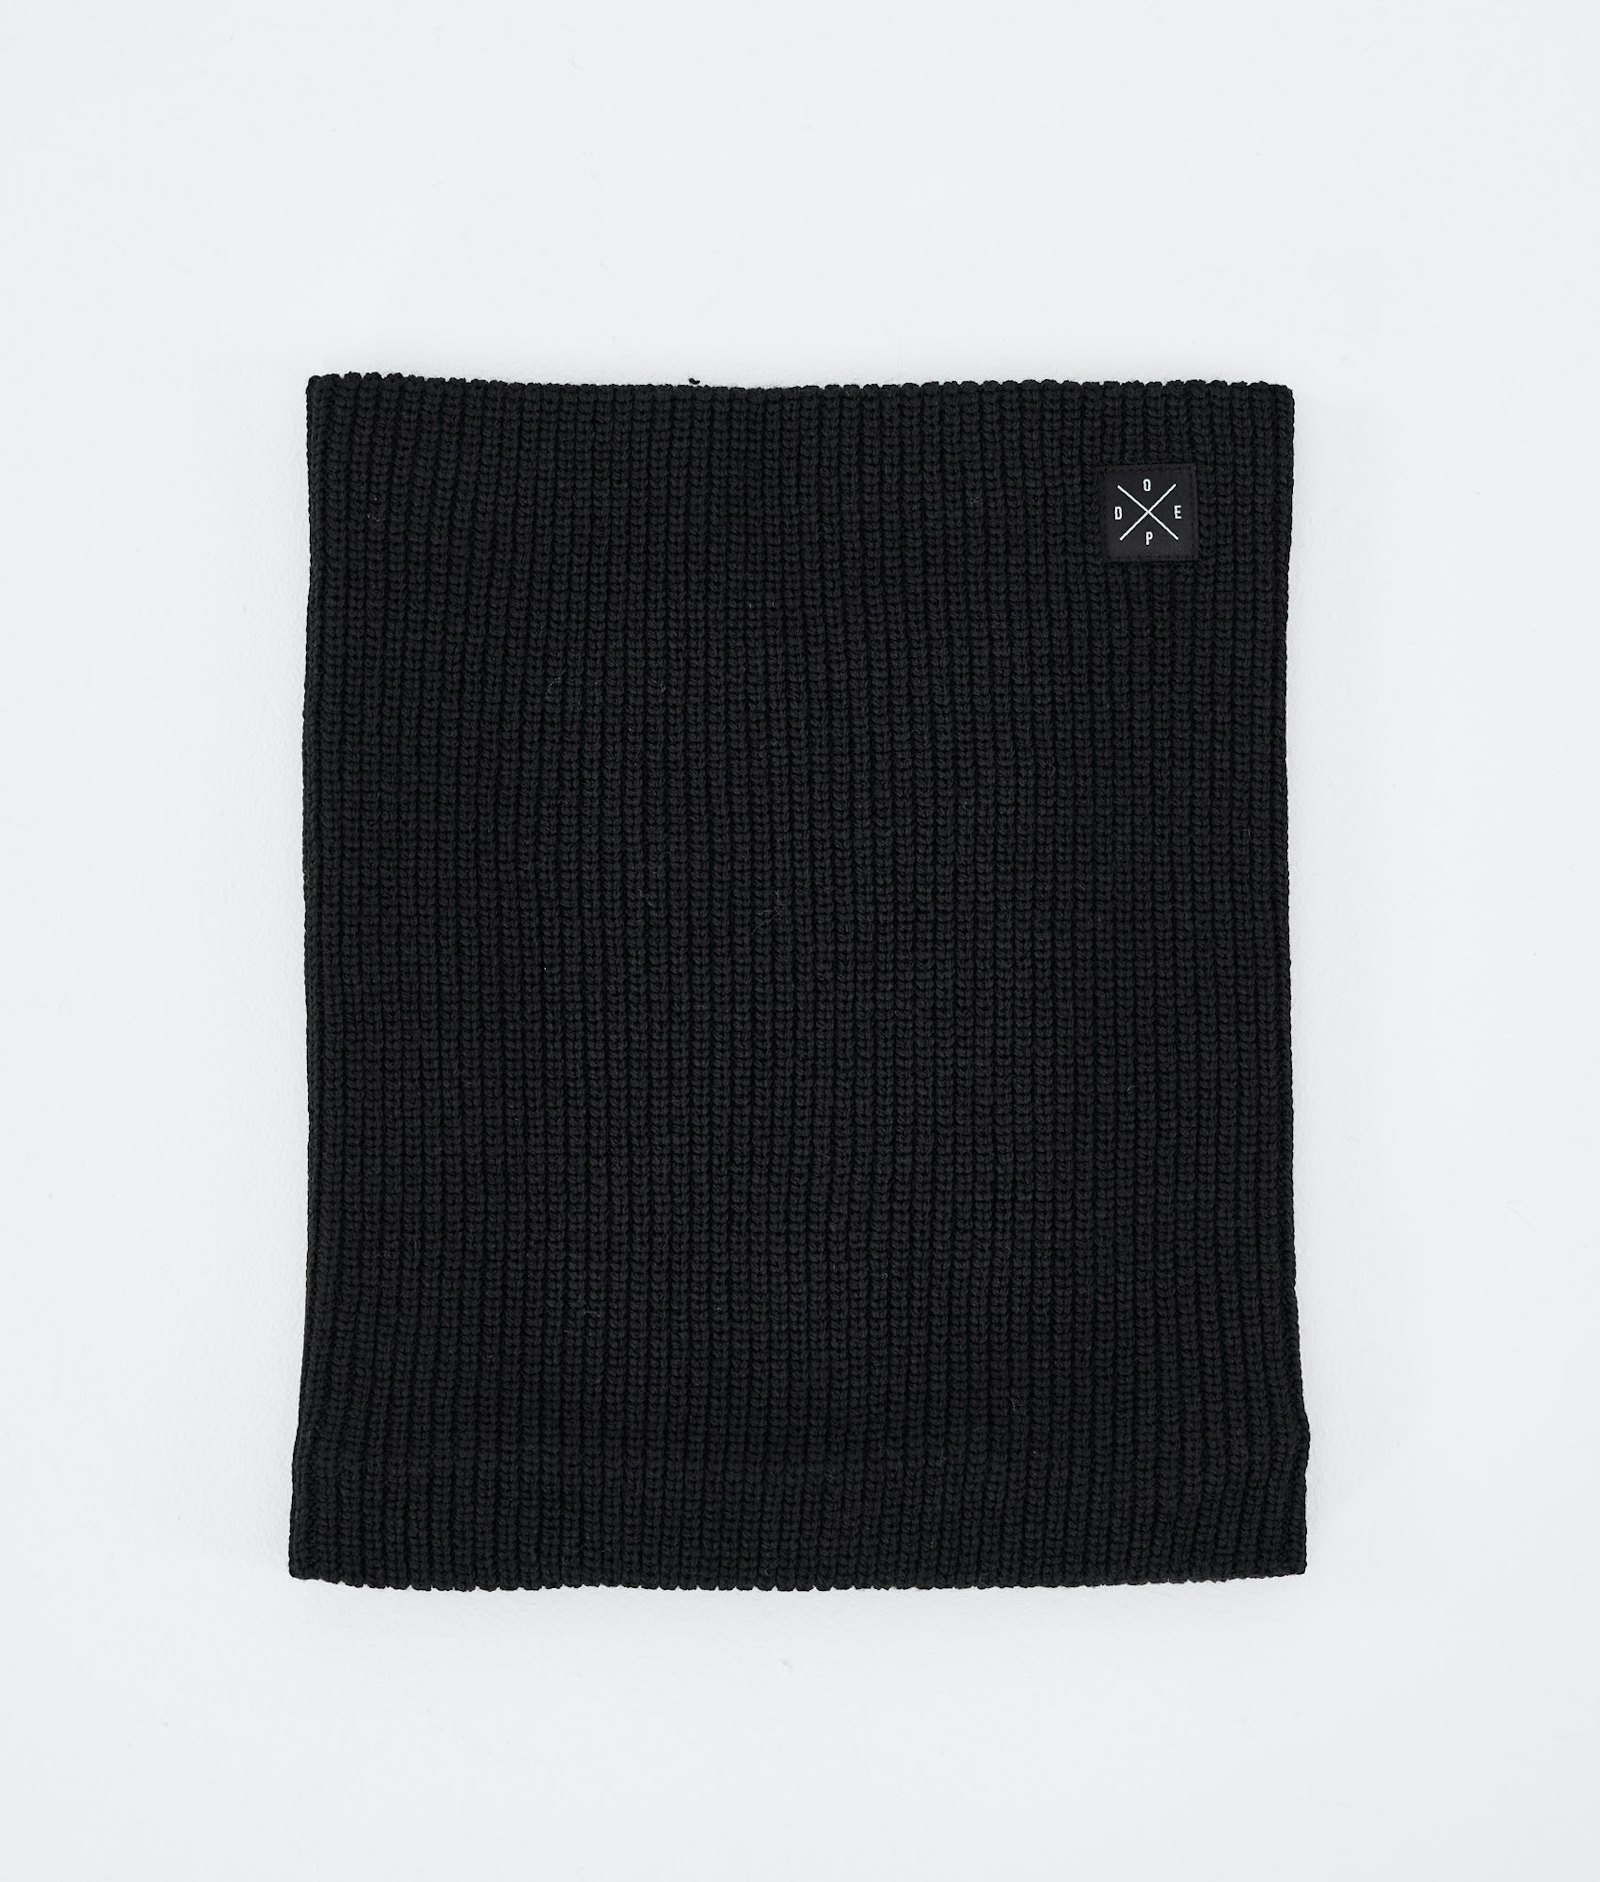 2X-UP Knitted Facemask Black, Image 1 of 3